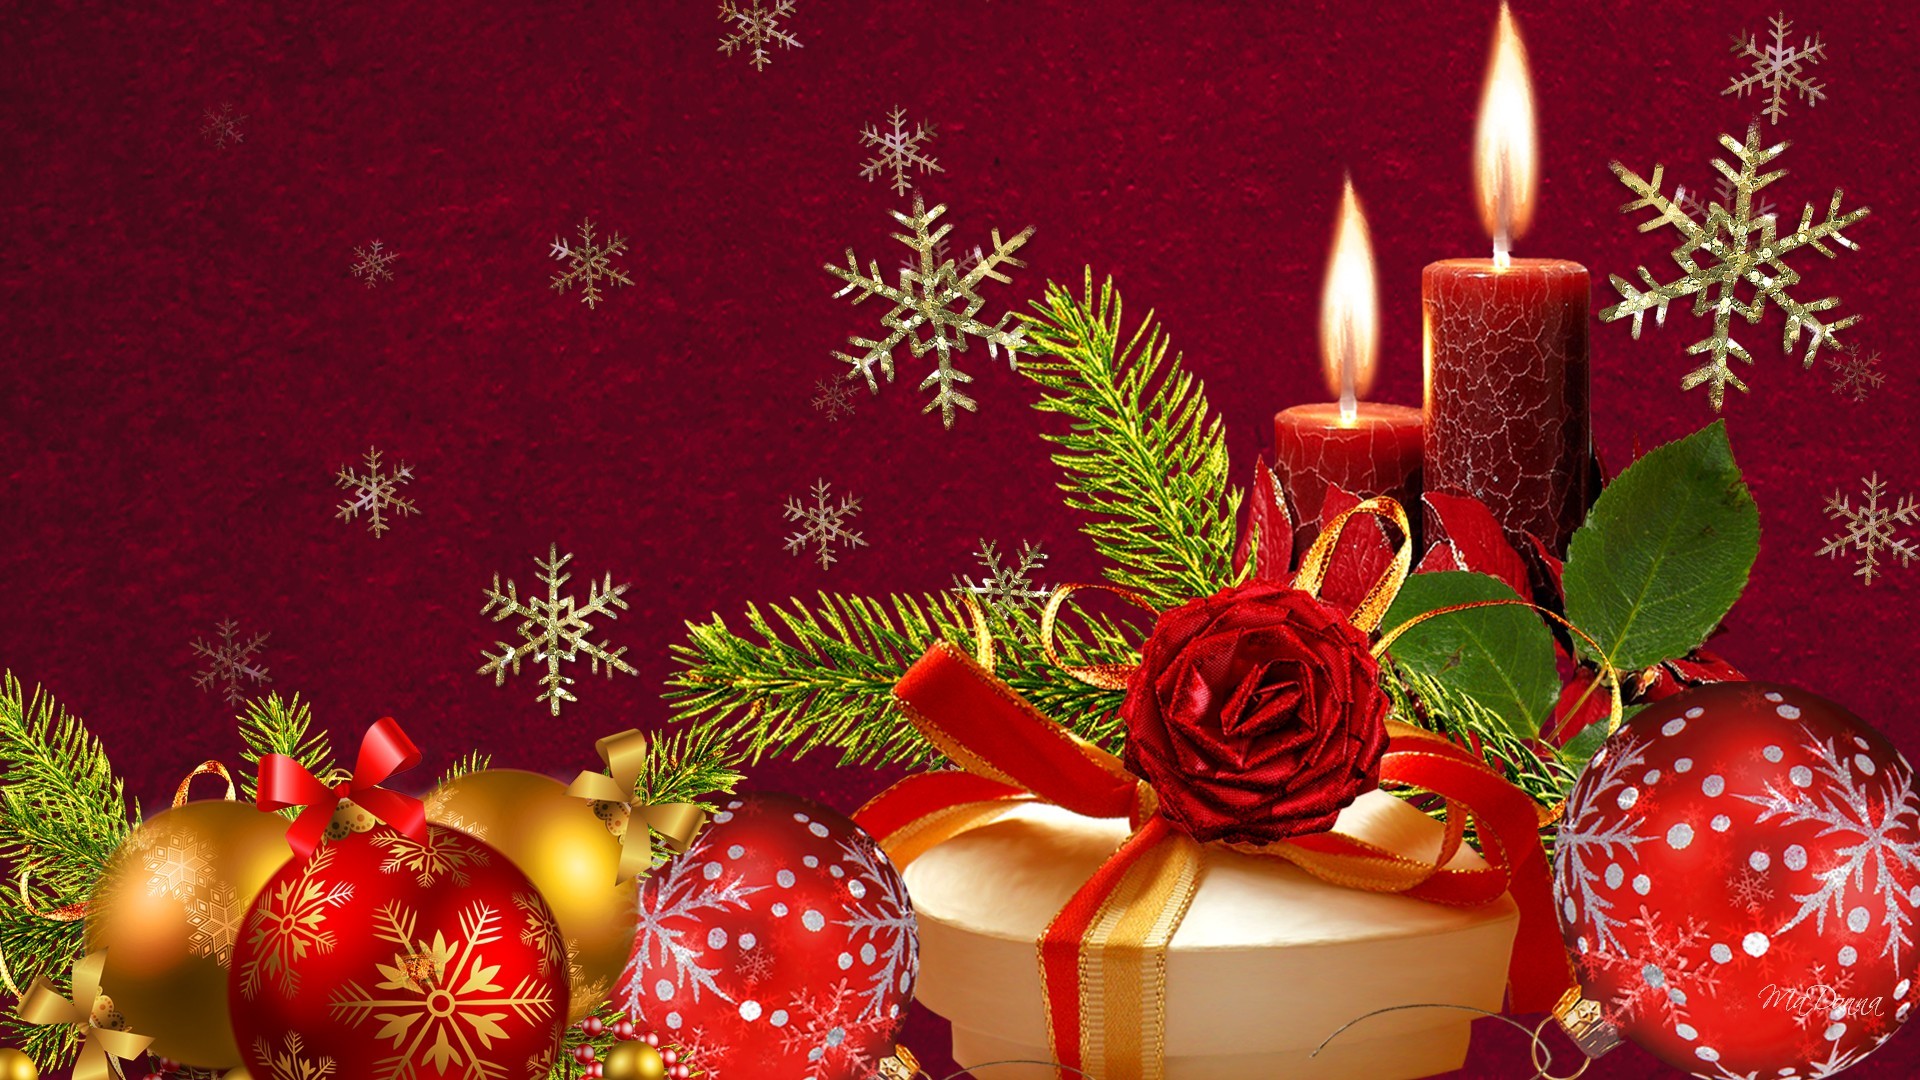 1920x1080 Merry Christmas Images - HD Wallpapers Backgrounds of Your Choice